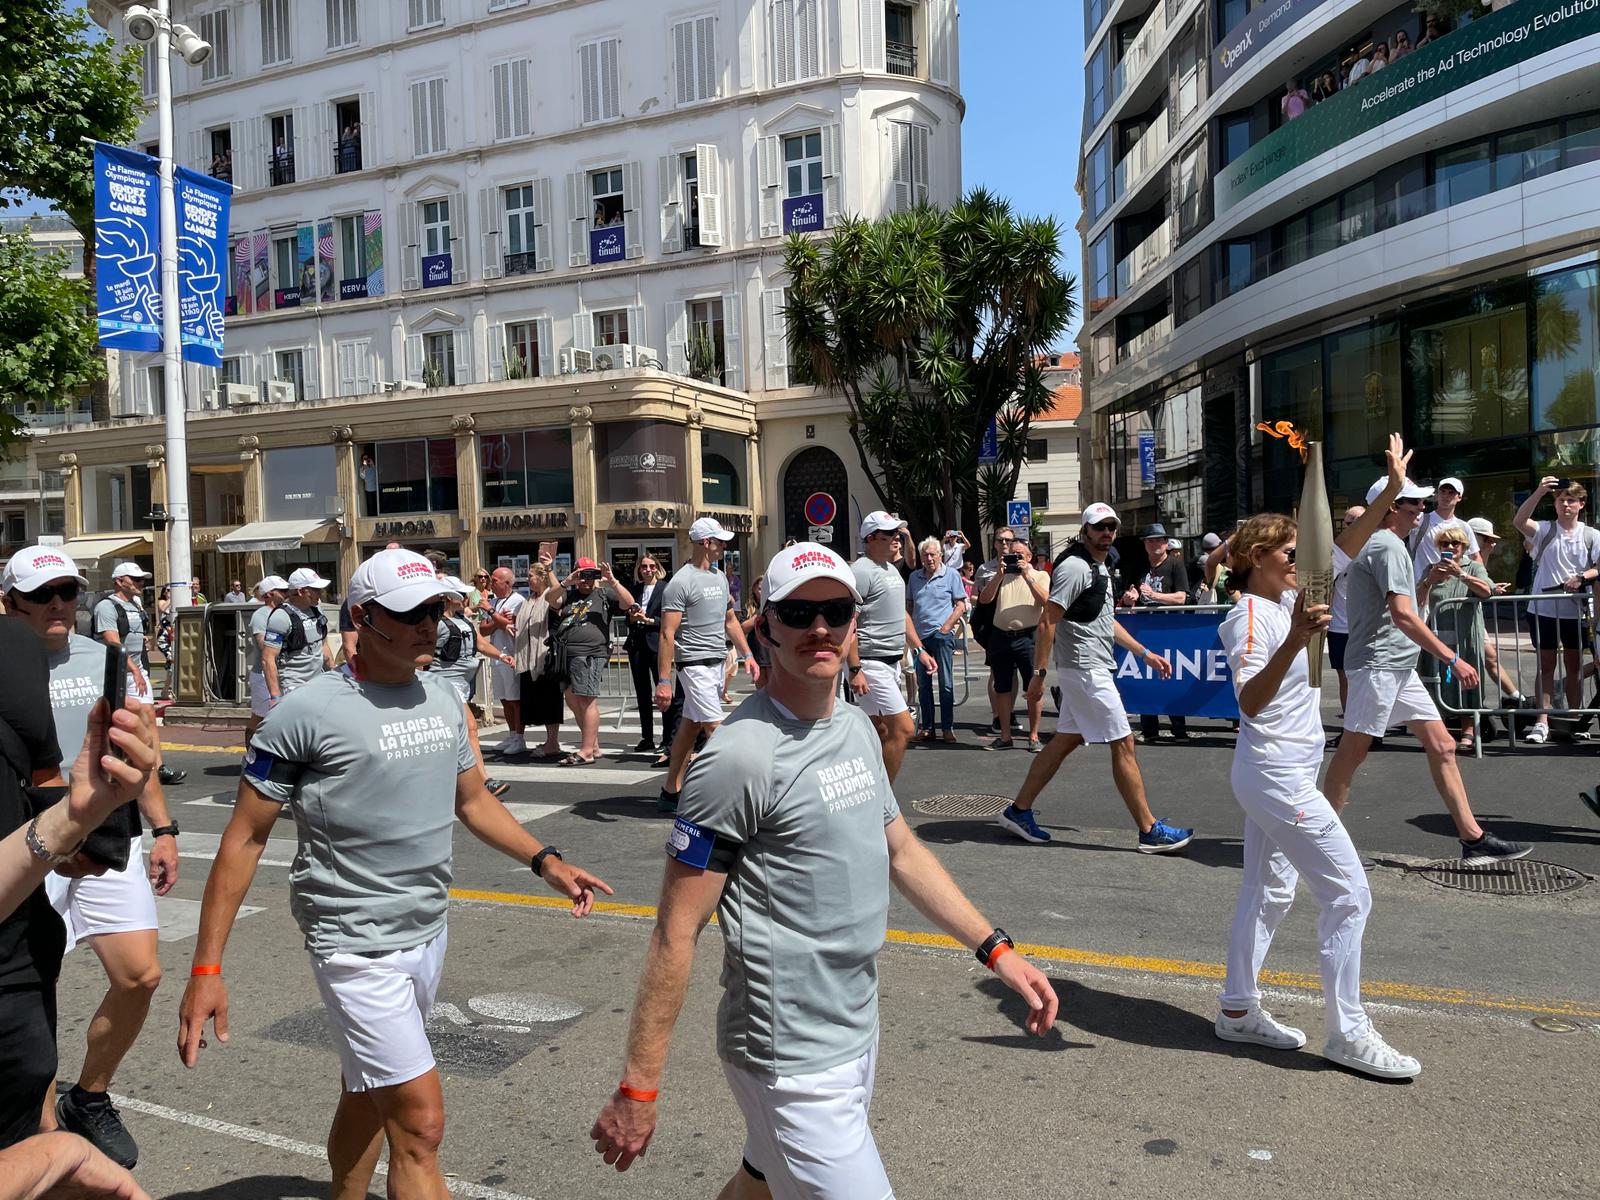 Olympic Torch on Promenade in Cannes. Credit Jack Benjamin